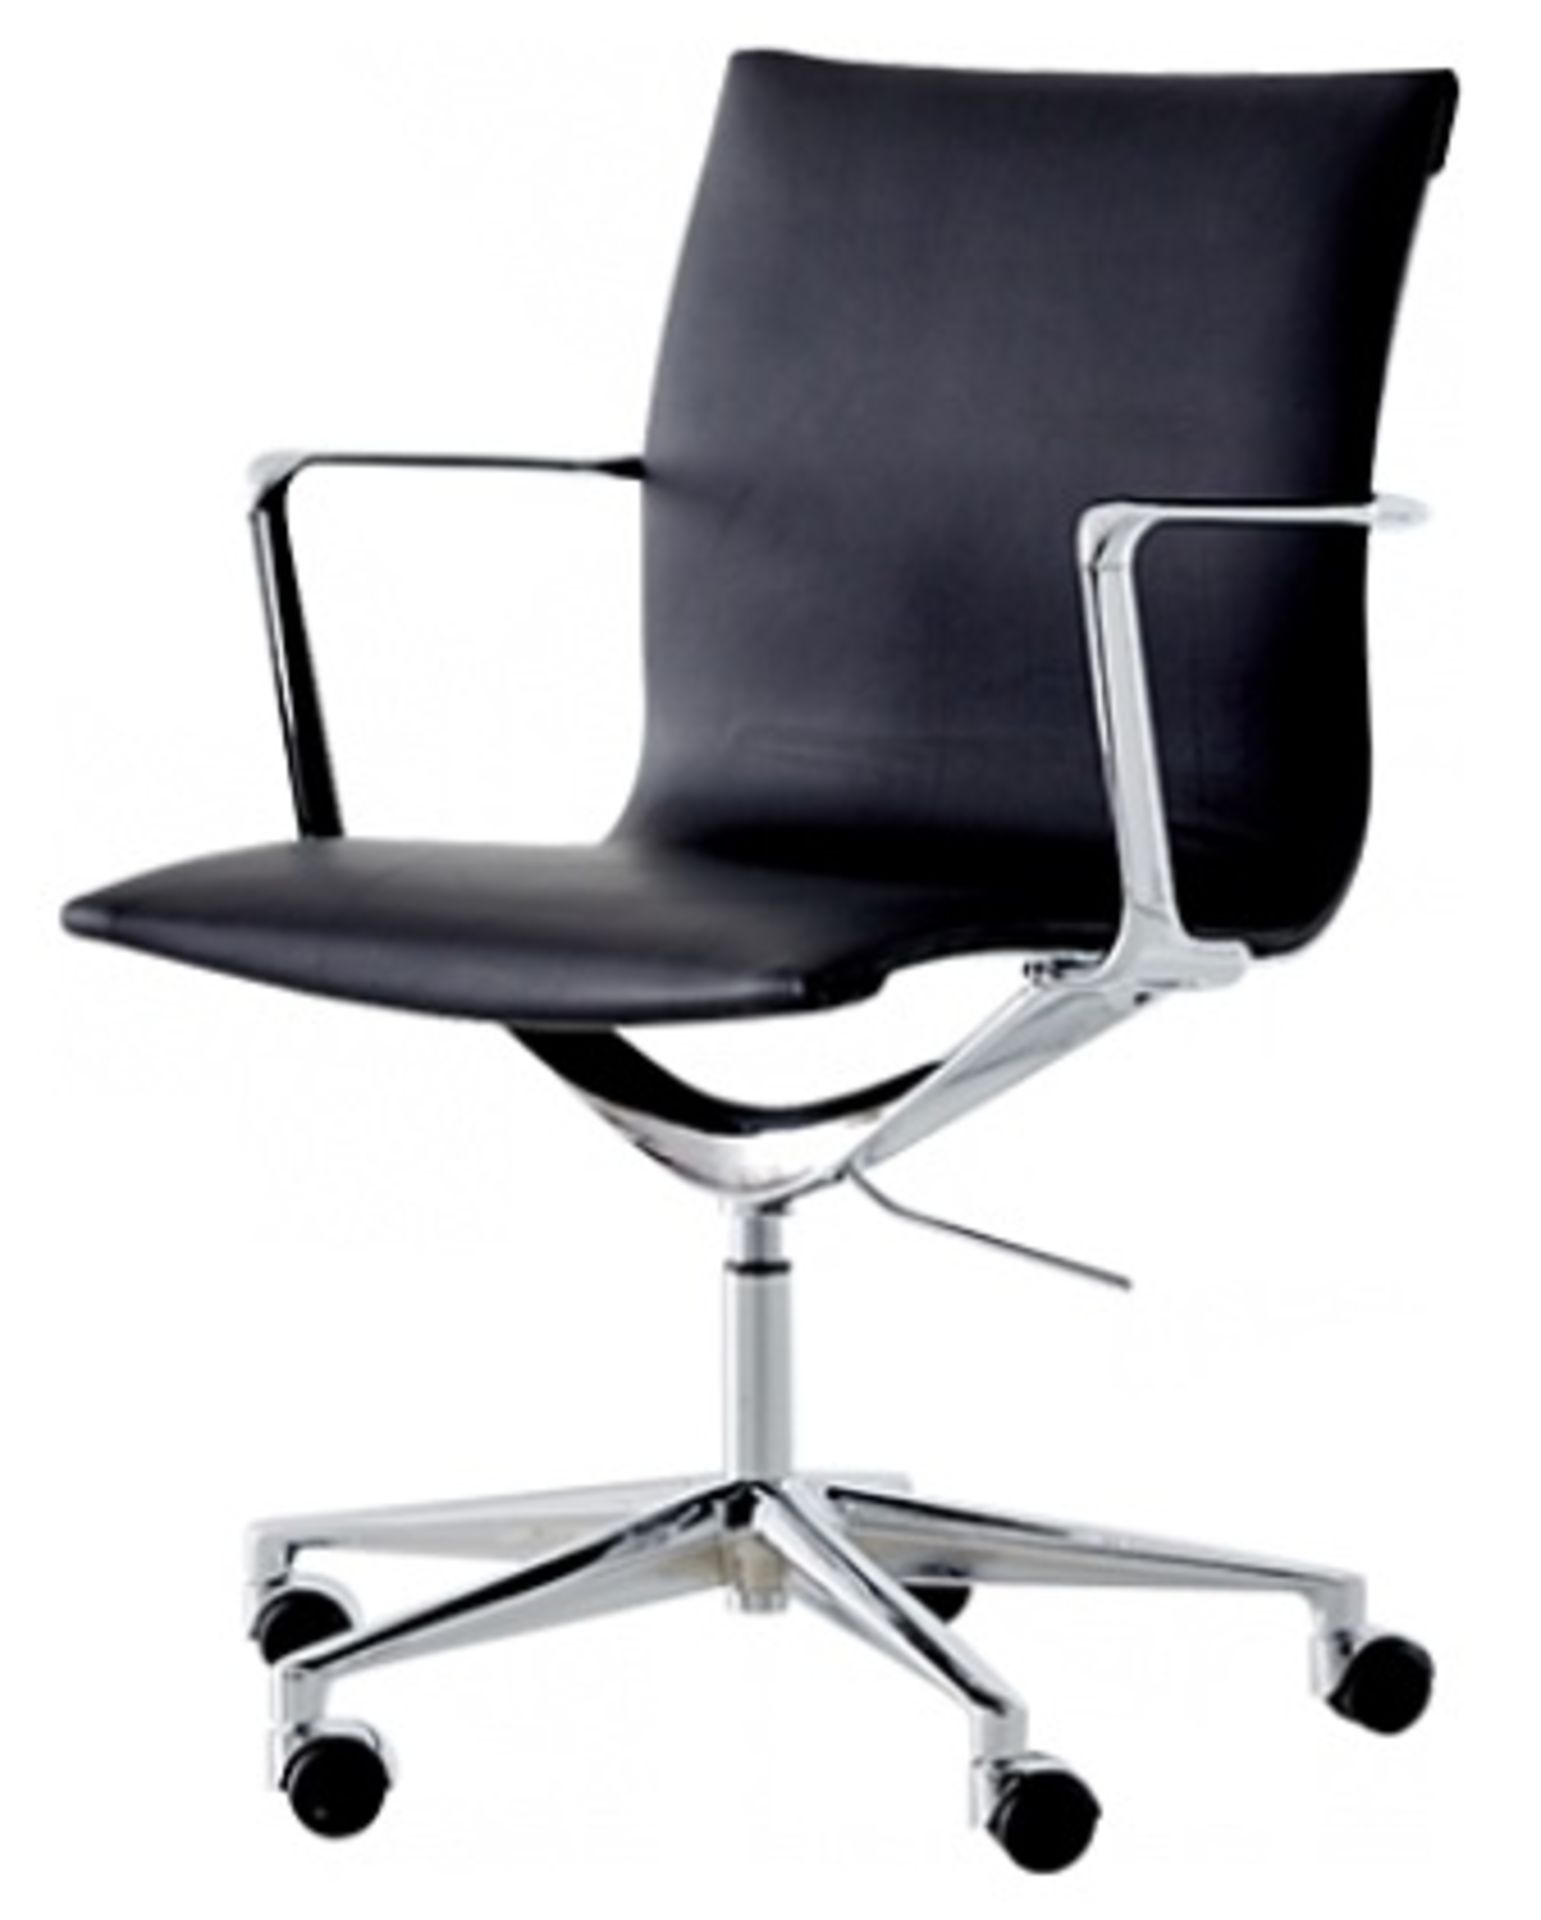 1 x LINEAR Eames-Inspired Low Back Office Swivel Chair In Black Leather- Brand New Boxed Stock -